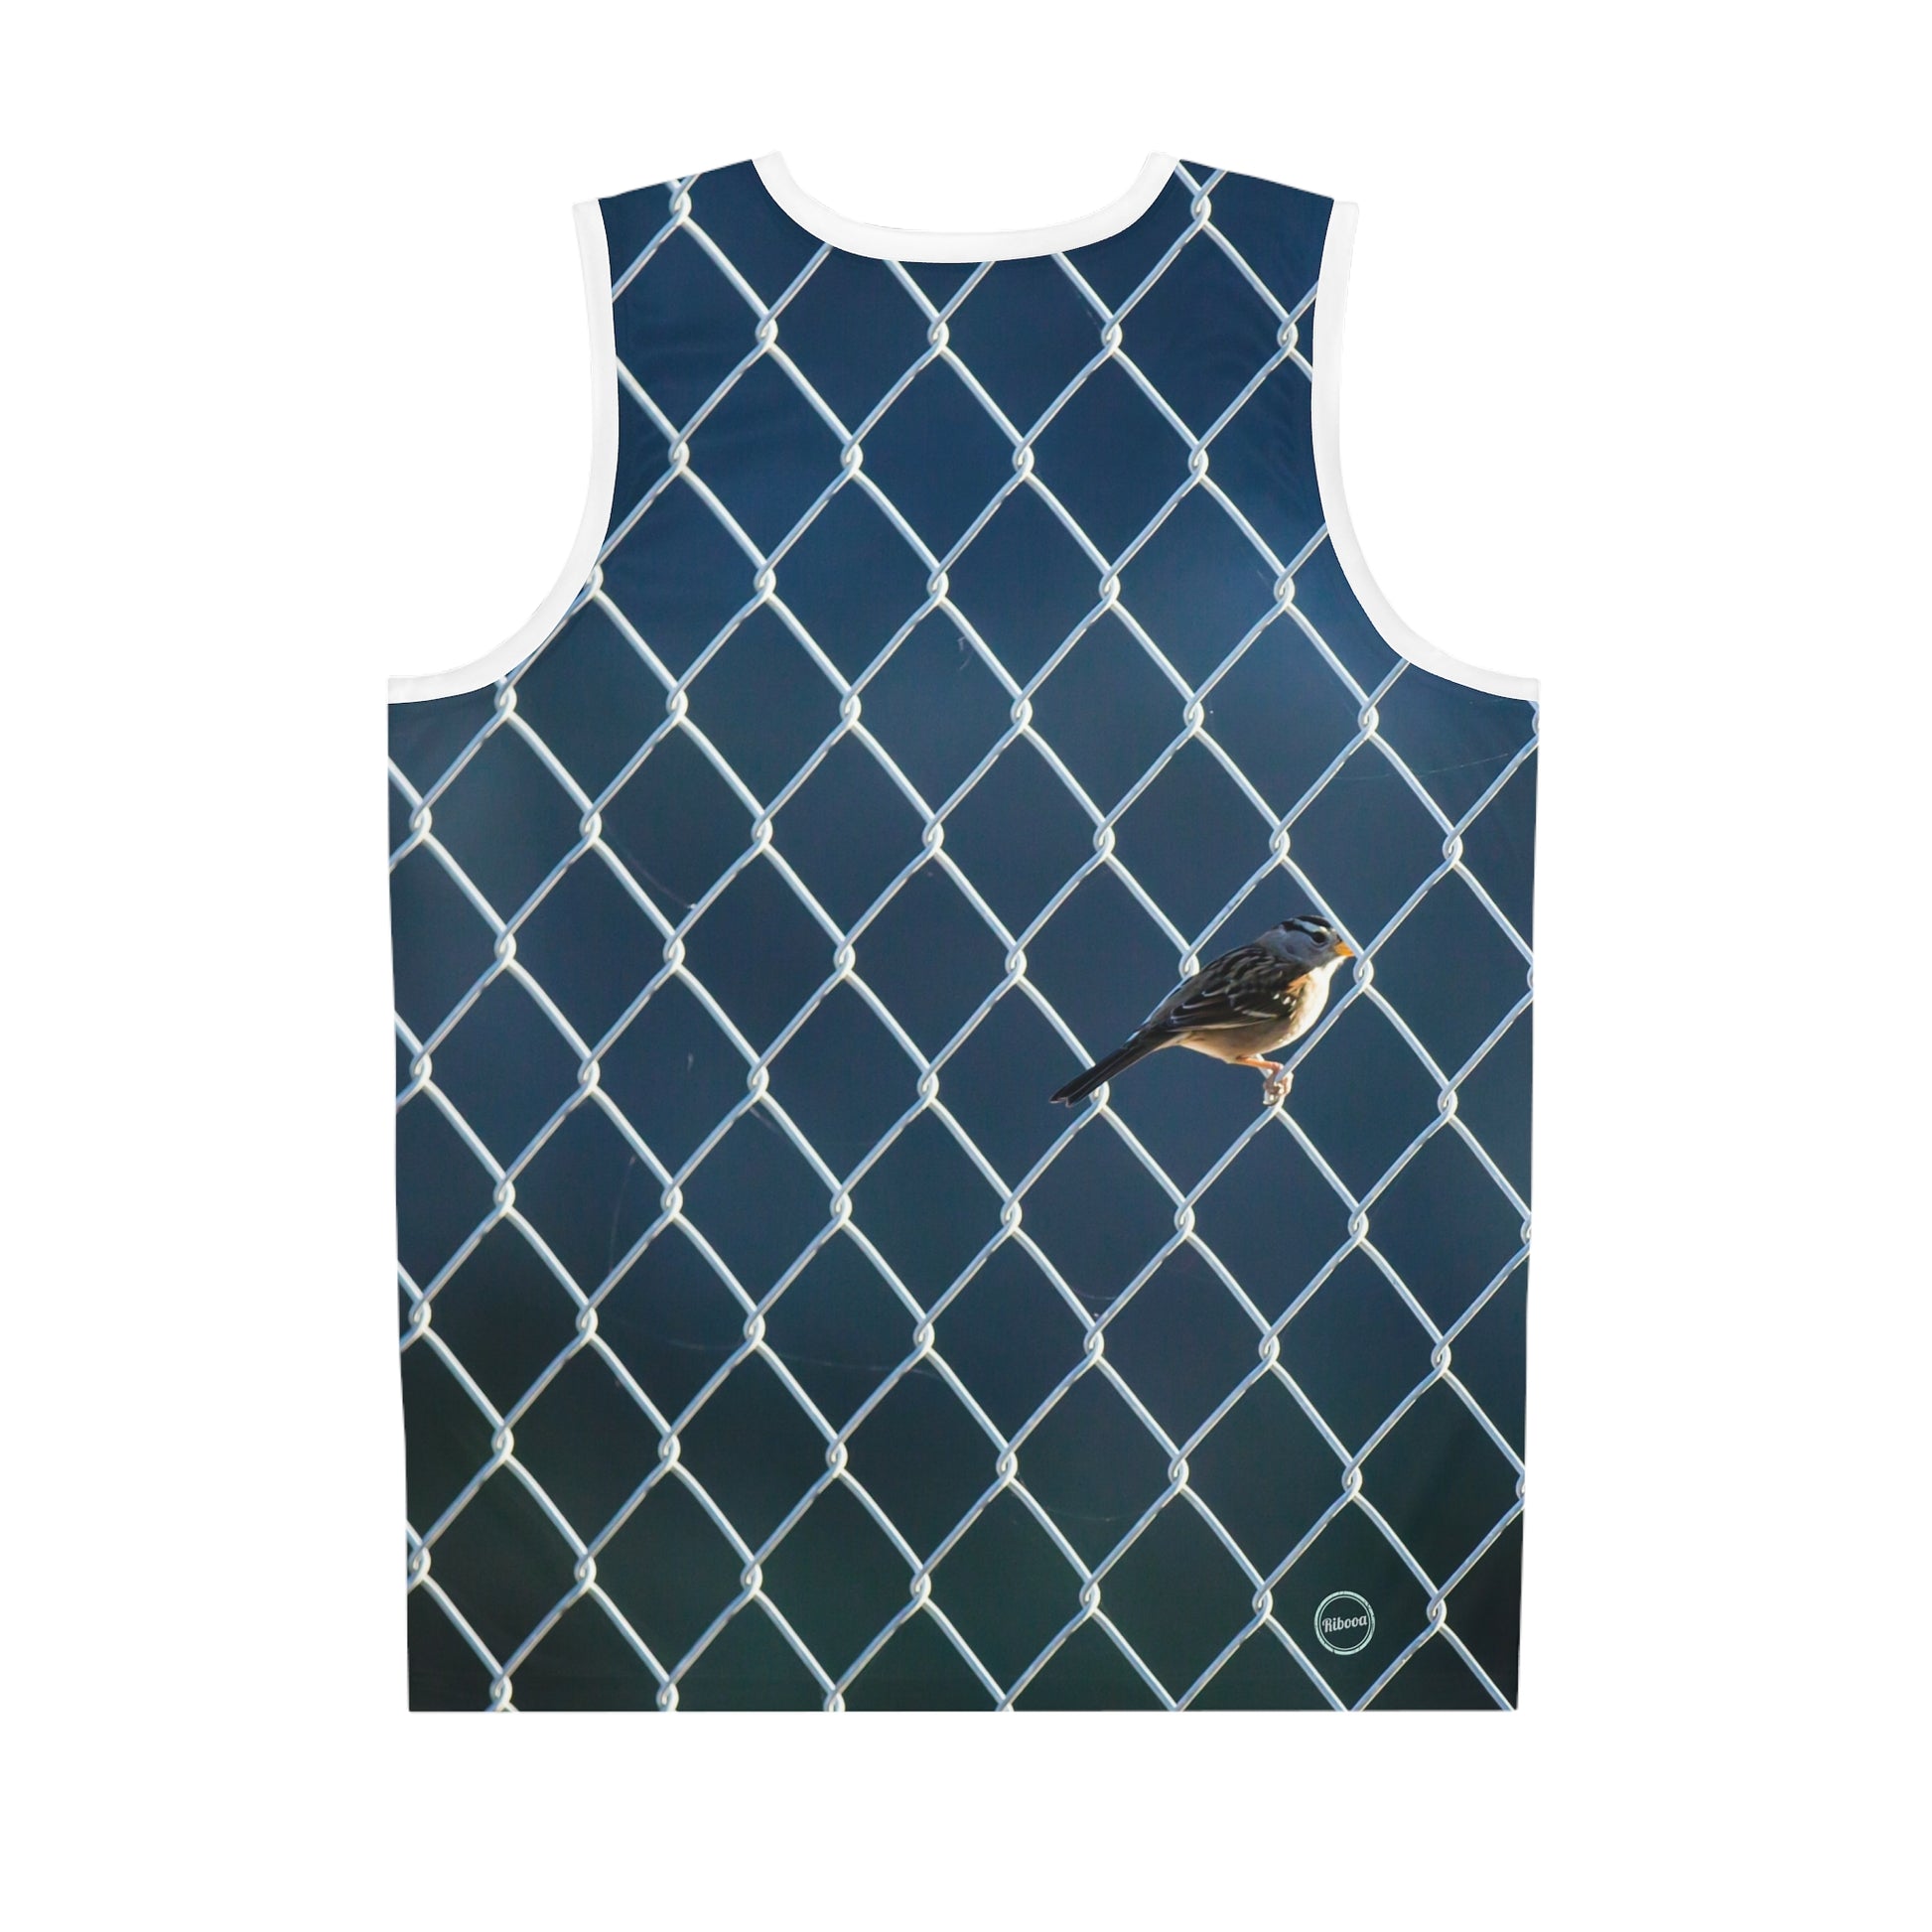 UNISEX Jersey | Bird On a Wire - Ribooa